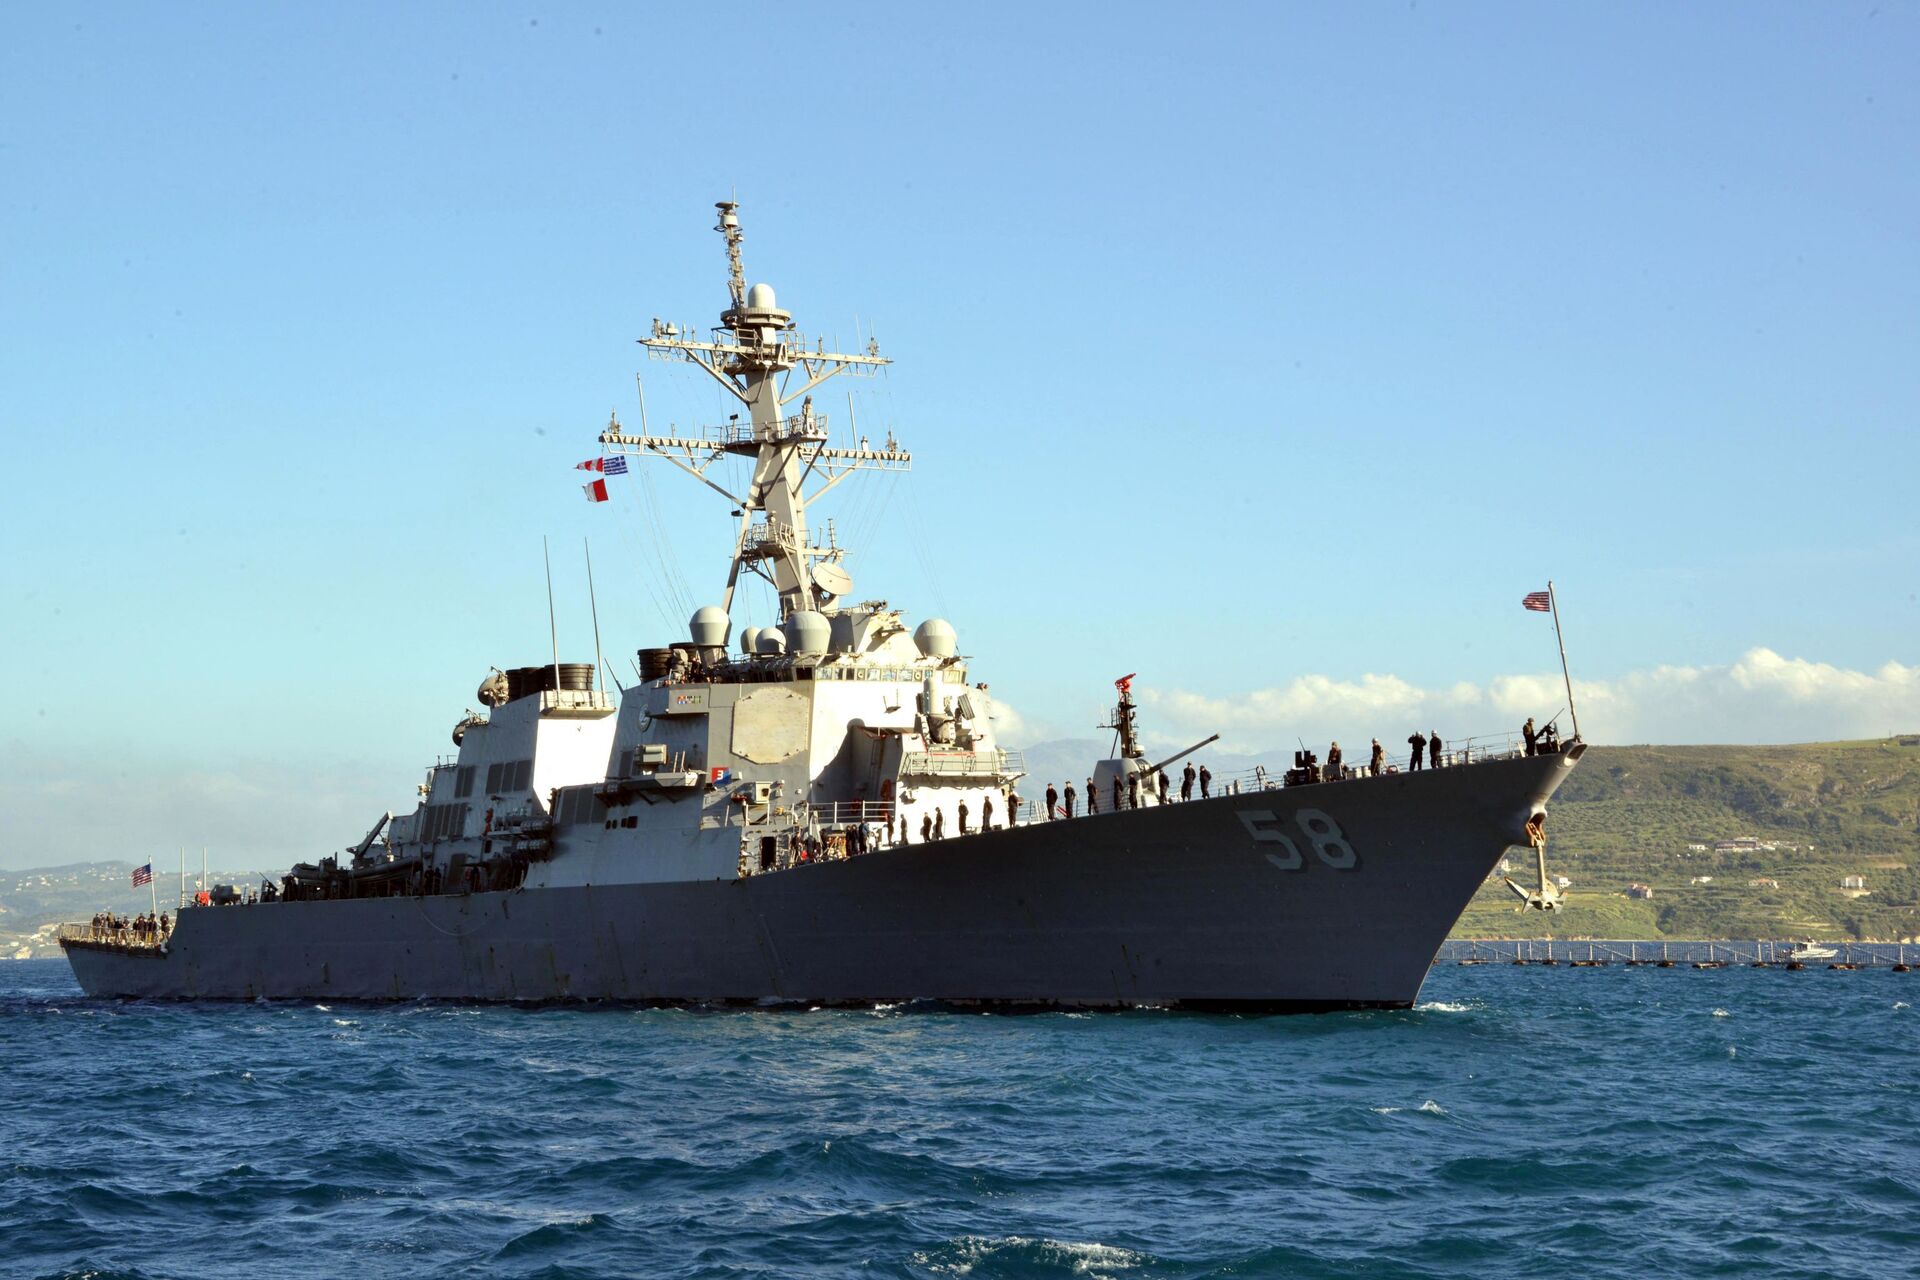 In this April 29, 2015 US Navy handout photo, the guided-missile destroyer USS Laboon (DDG 58) arrives in Souda Bay, Greece on April 29, 2015 for a scheduled port visit.  - Sputnik International, 1920, 14.11.2022